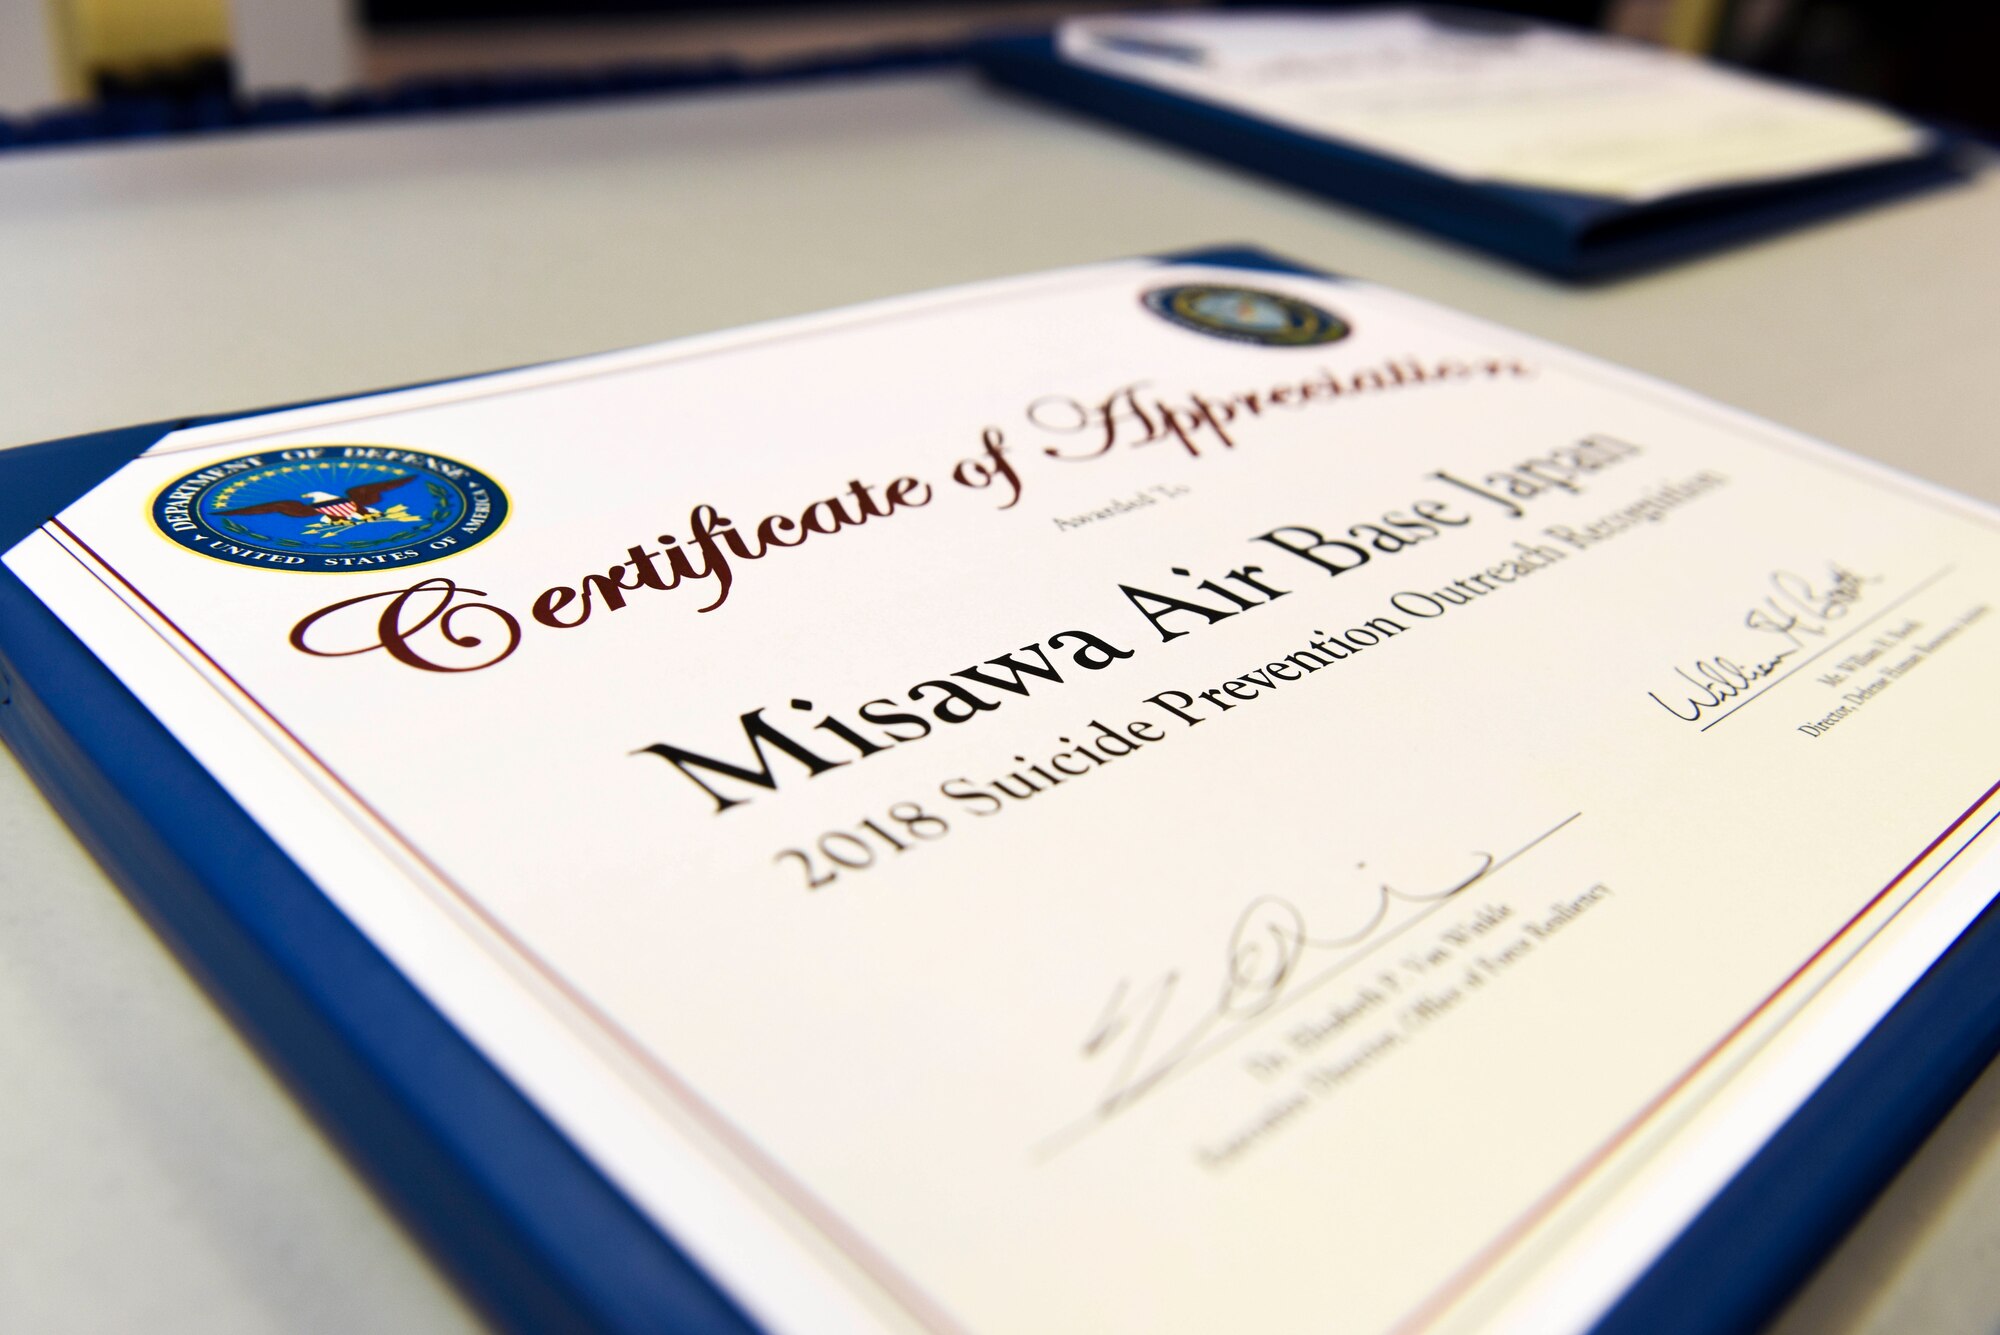 Misawa Air Base, Japan was recognized by the Department of Defense as the Air Force's top installation for suicide prevention outreach during the 2018 Defense Suicide Prevention Month recognition ceremony at the Pentagon, in Arlington, Va., May 15, 2019. Misawa AB is the Northernmost U.S. installation in Japan and the only bilateral, joint-service, civilian-use air base in the Pacific. (U.S. Air Force photo by Tech Sgt. Anthony Nelson Jr.)